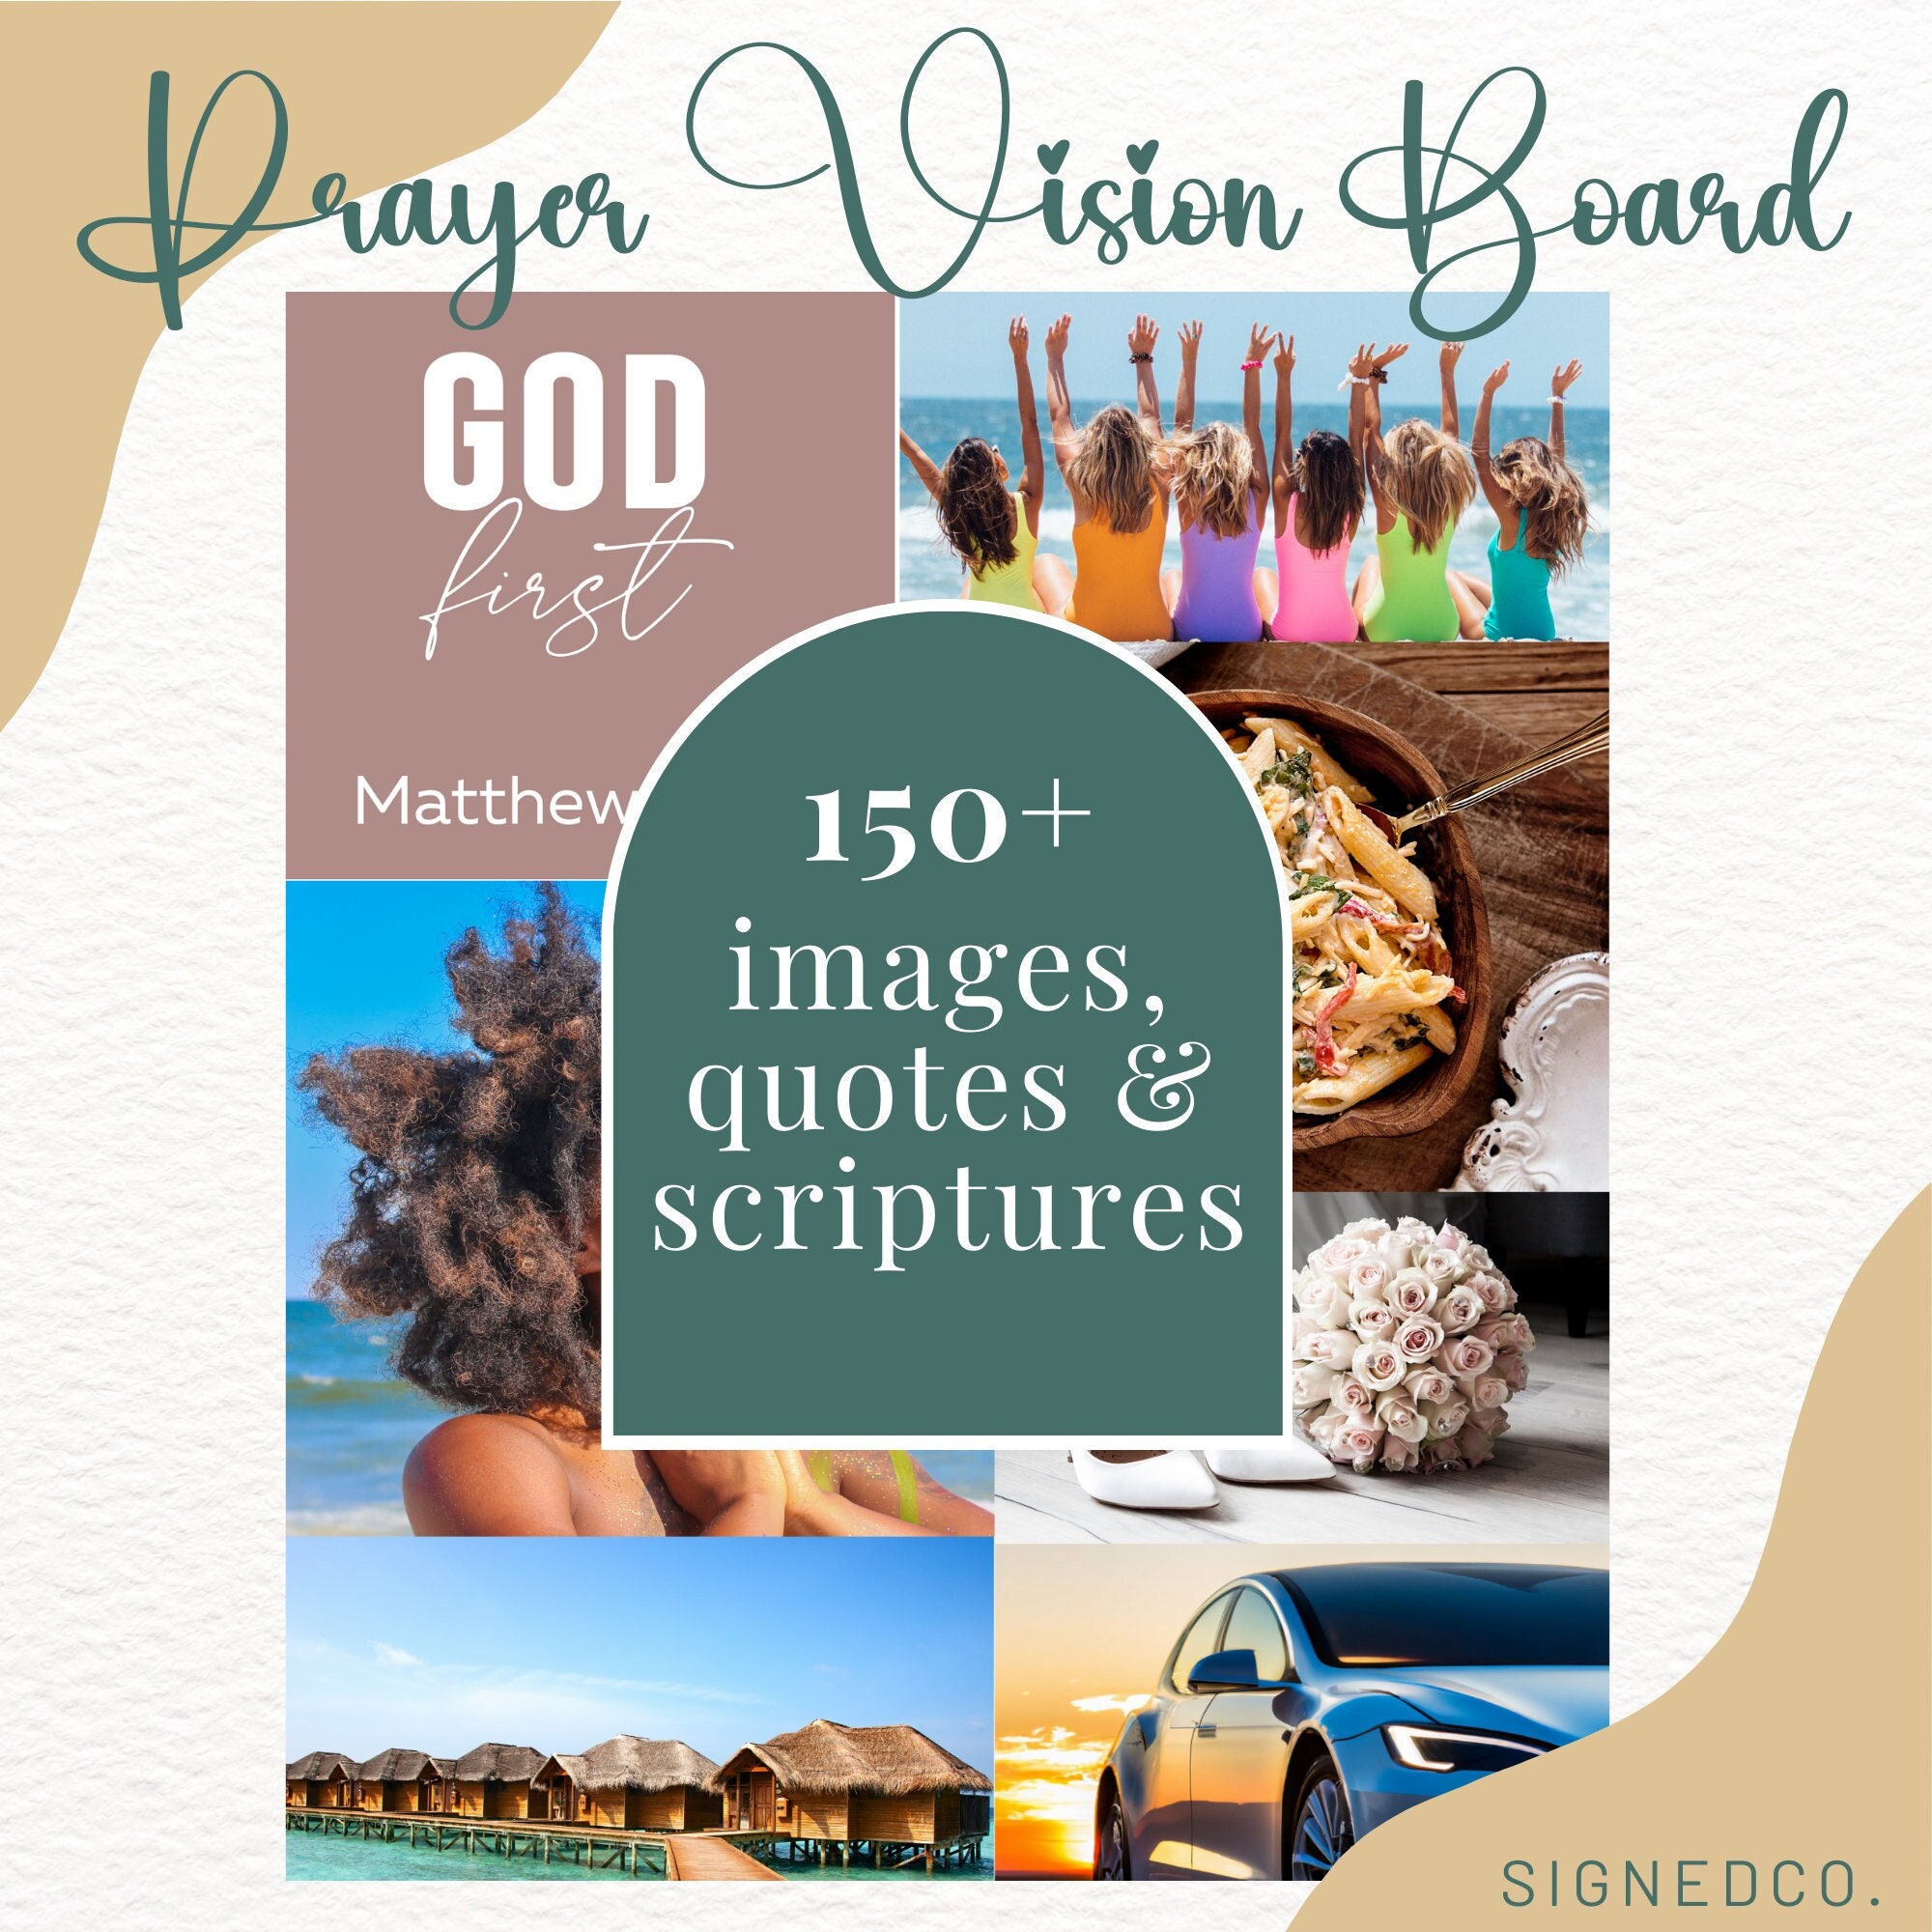 Christian Vision Board: Clip Art Book | Create a Powerful Future life goals  using 120+ Pictures, Uplifting sayings and Bible Verses. (Vision Board